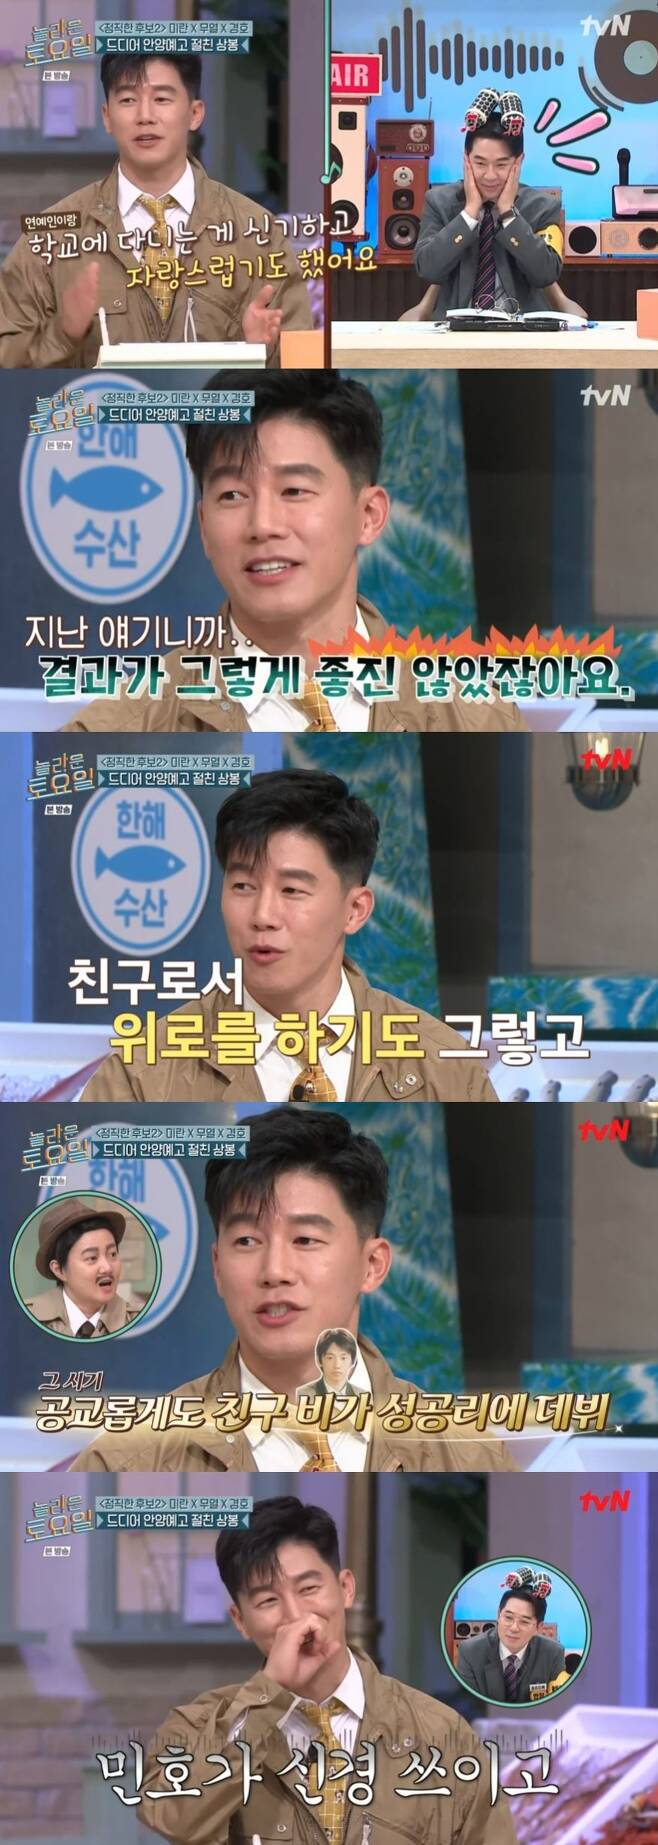 Kim Moo Yeol talks about Friend BoomOn TVNs Amazing Saturday (hereinafter Amazing Saturday), which aired on September 17, Ra Mi-ran, Kim Moo Yeol and Yun Jing appeared as guests.On this day, MC Boom was welcomed when Kim Moo Yeol, an alumni of Anyang High School, appeared.He said, I will start an interview with my beloved lady.Kim Moo Yeol also talked about Boom during his past school days: Im actually close; Minho was the first to debut as a singer when I was in high school.I was proud and proud to go to school with entertainers. Kim Moo Yeol then said: Its a story before the day. (Boom) didnt have a good result; comfort as Friend and it was hard to talk about.And then it made its debut again, and it was successful because it was Friend, so Minho was worried about it. 